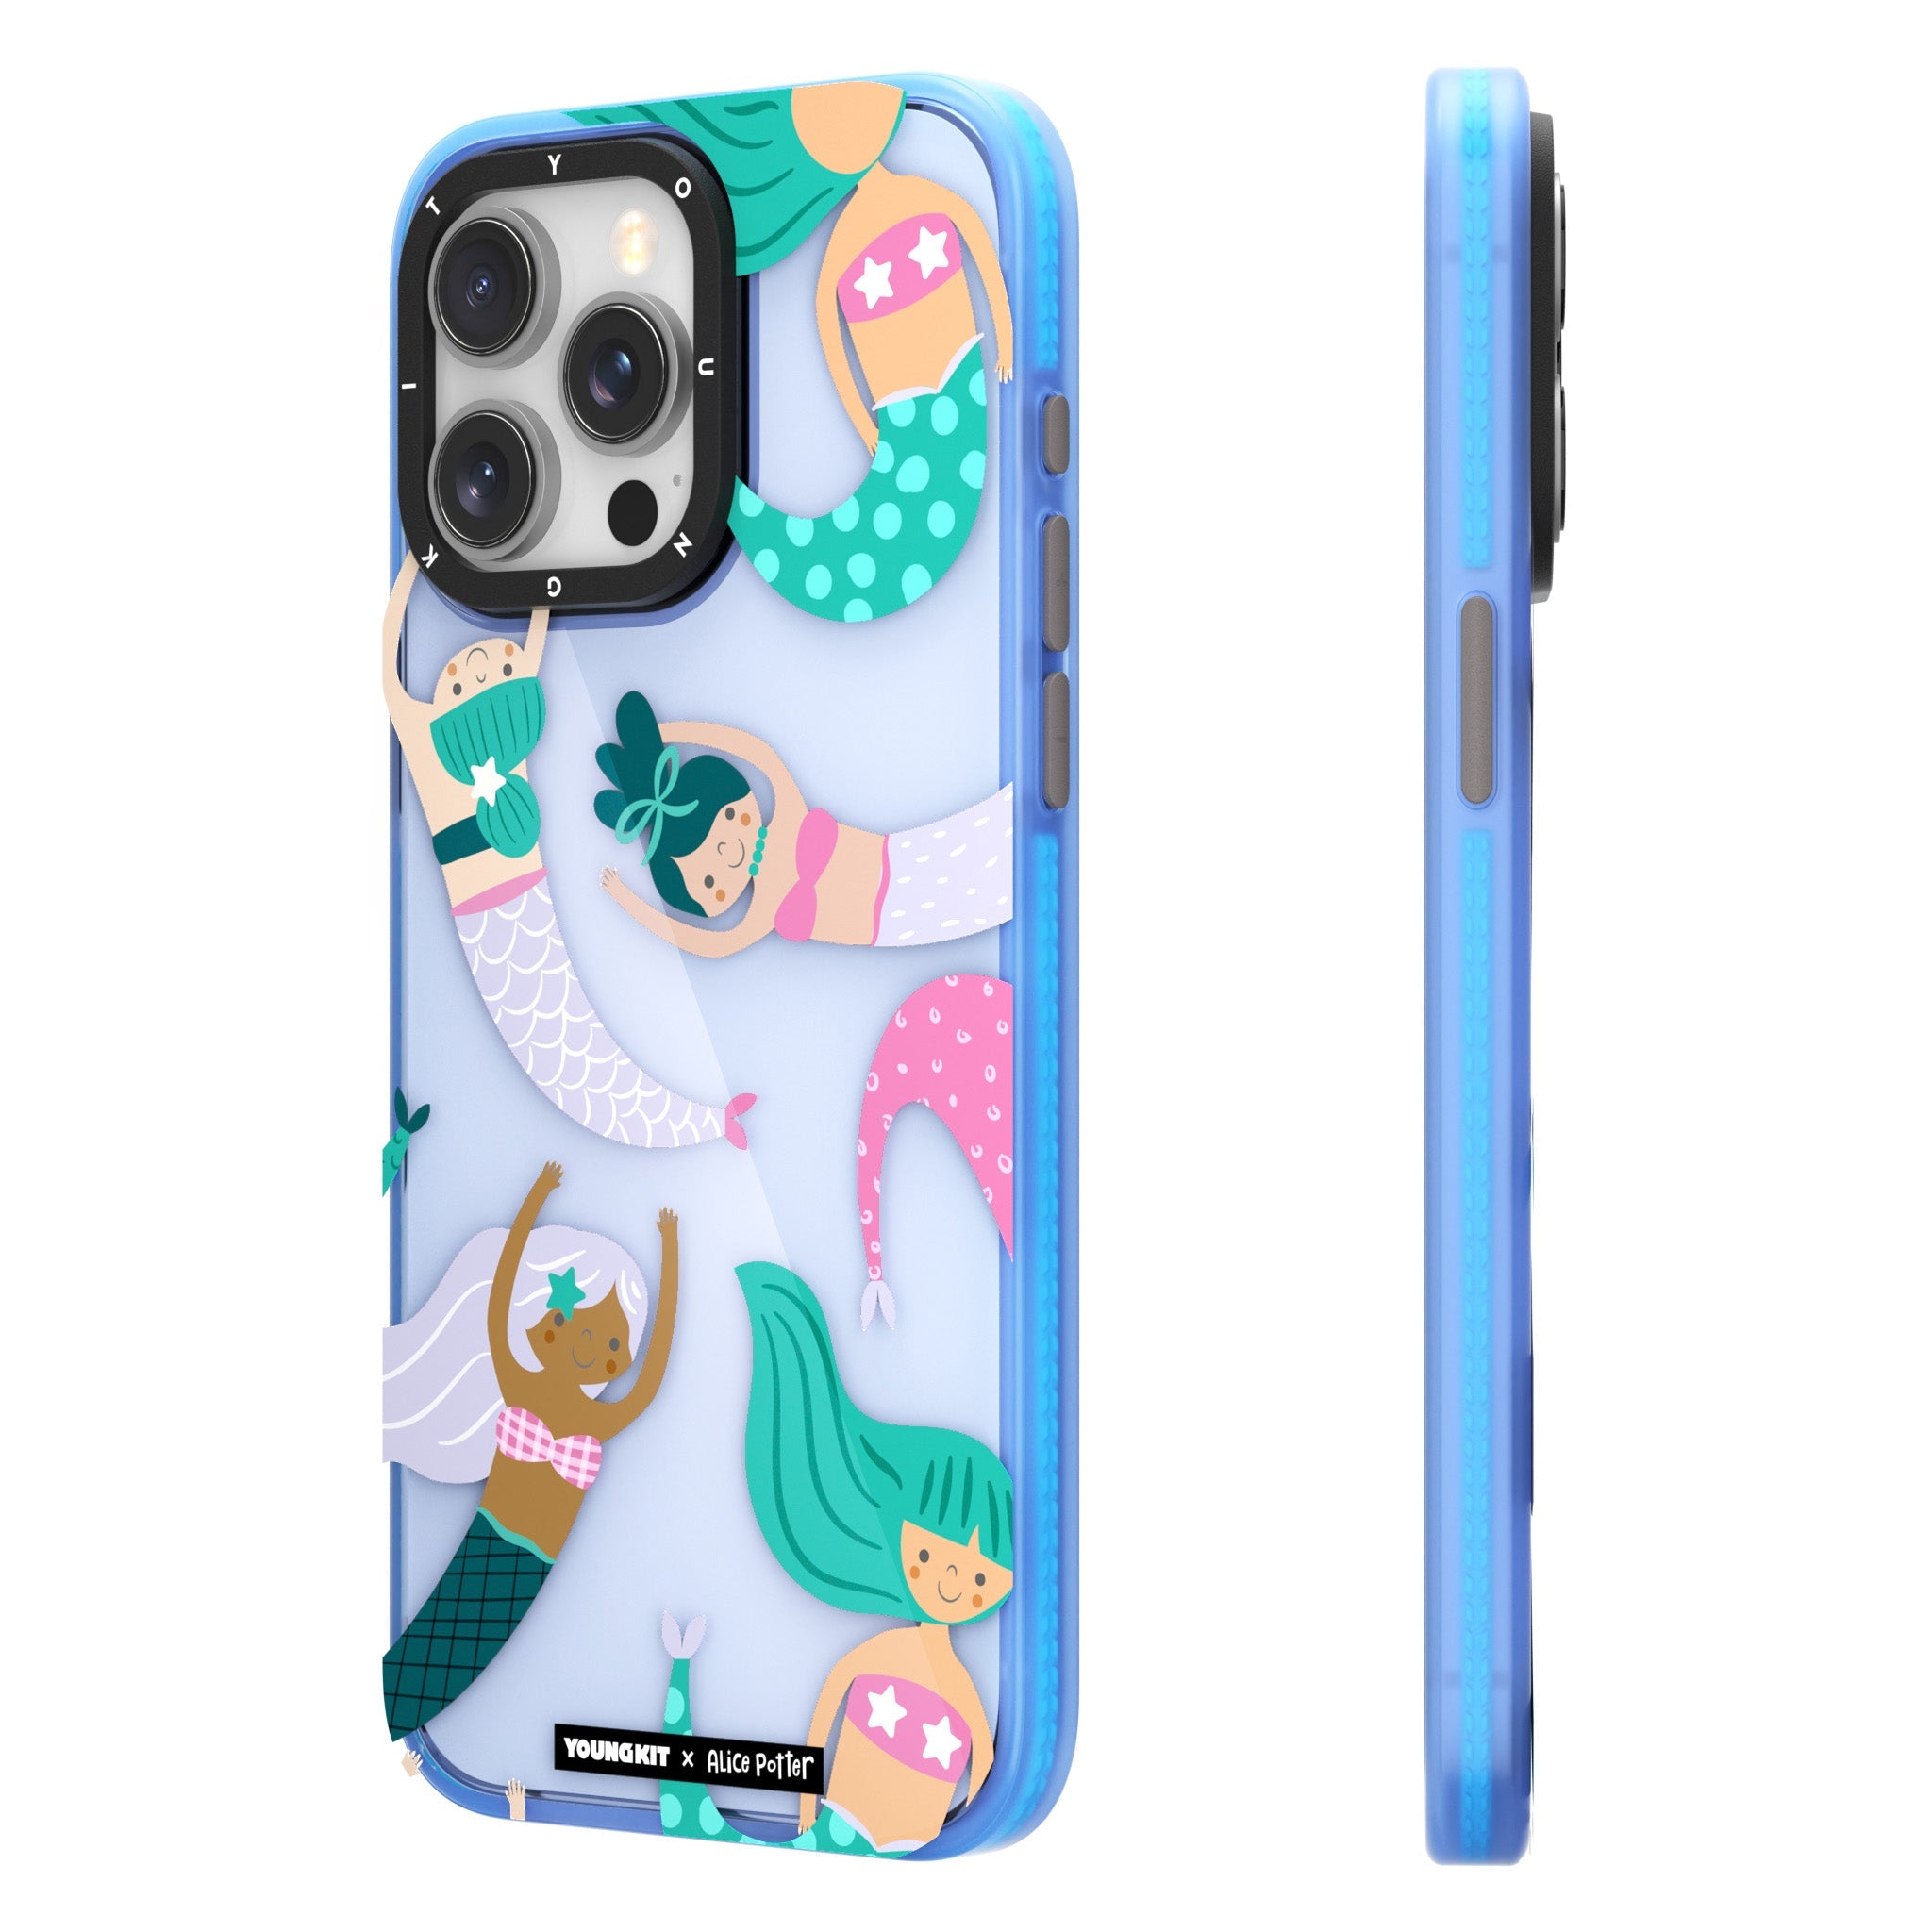 YOUNGKIT X Alice Potter iPhone15 Case-Mermaid